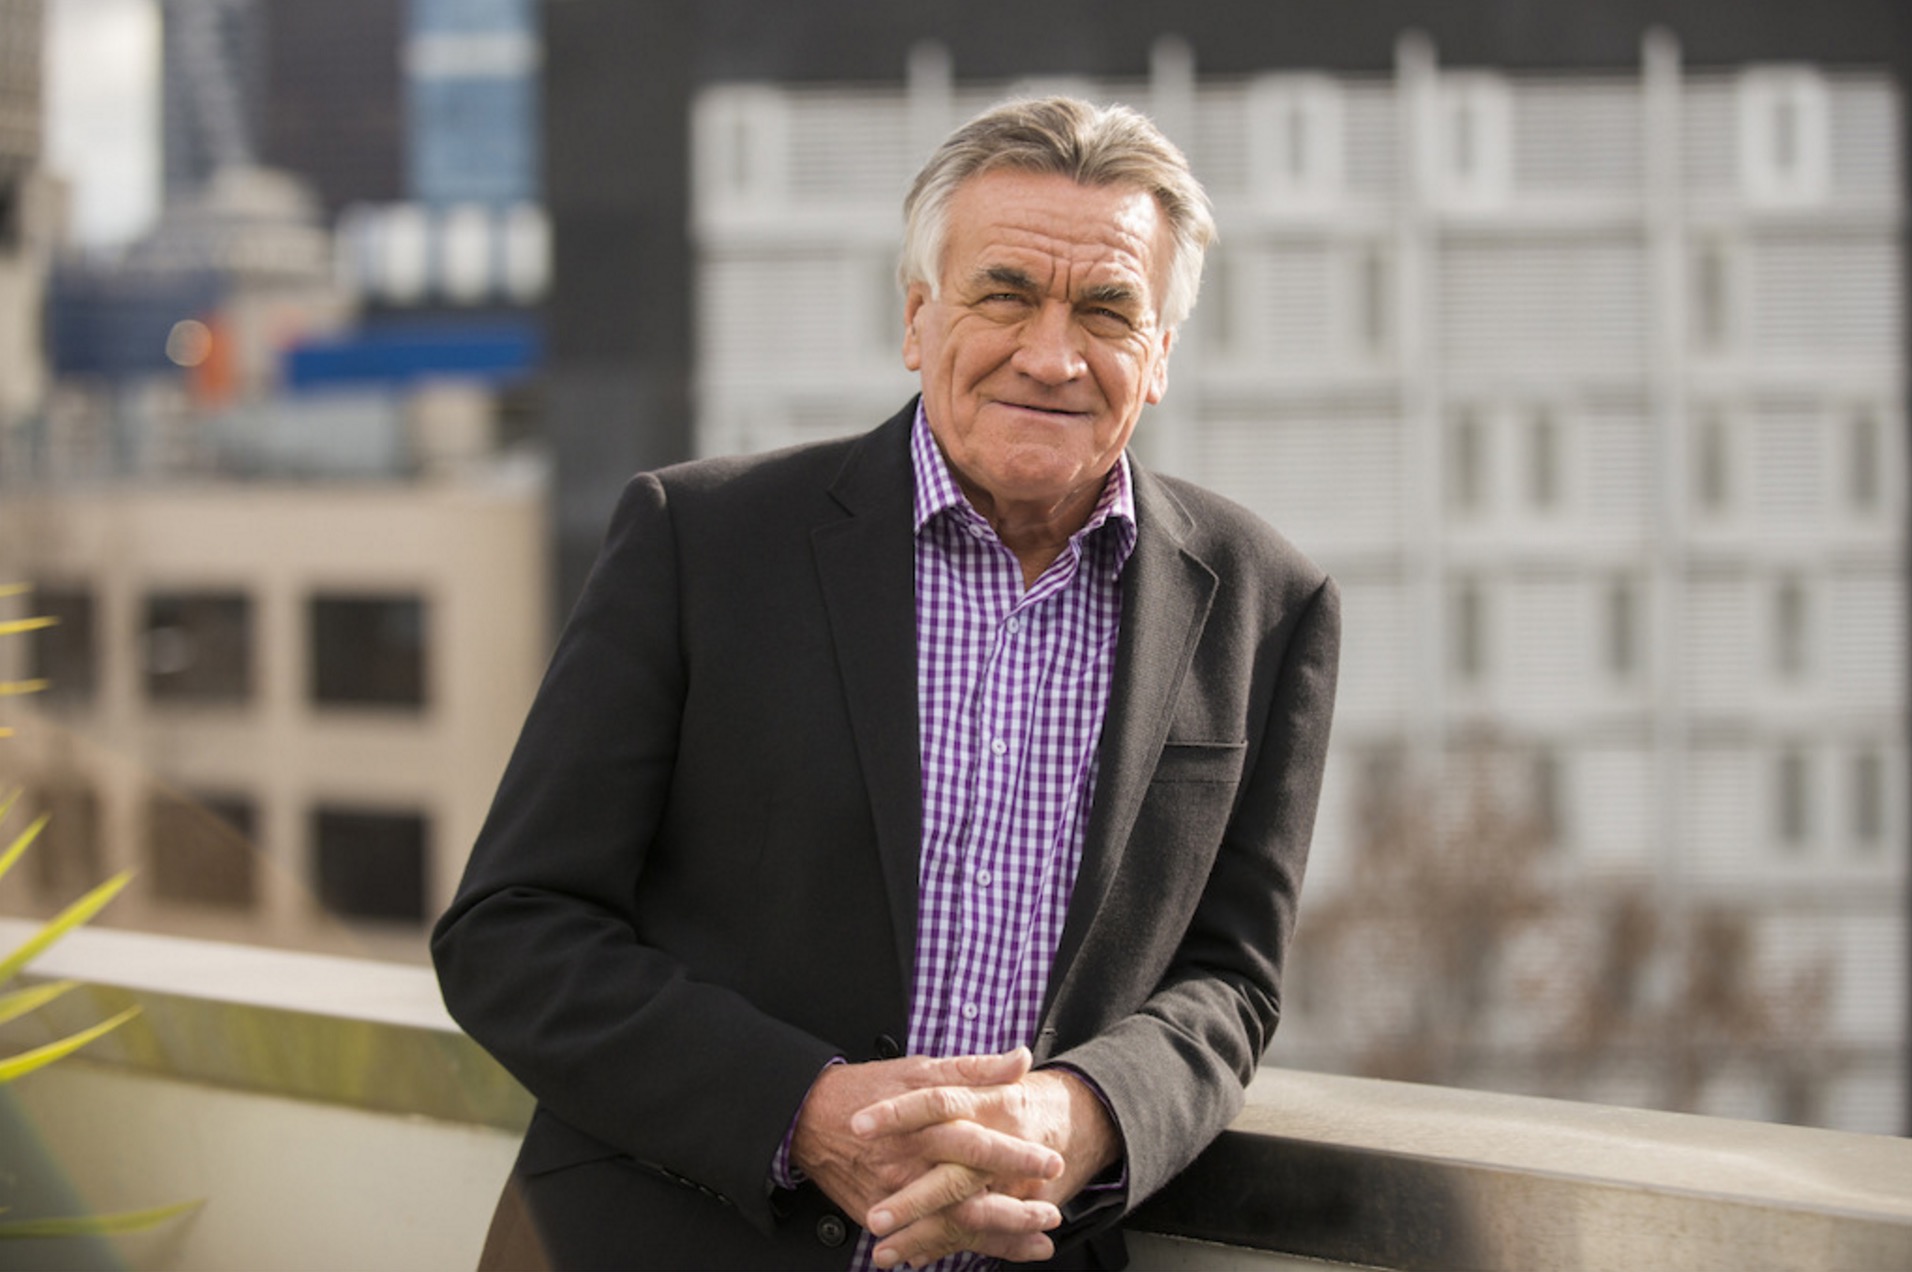   Barrie Cassidy  image - supplied/ABCTV 